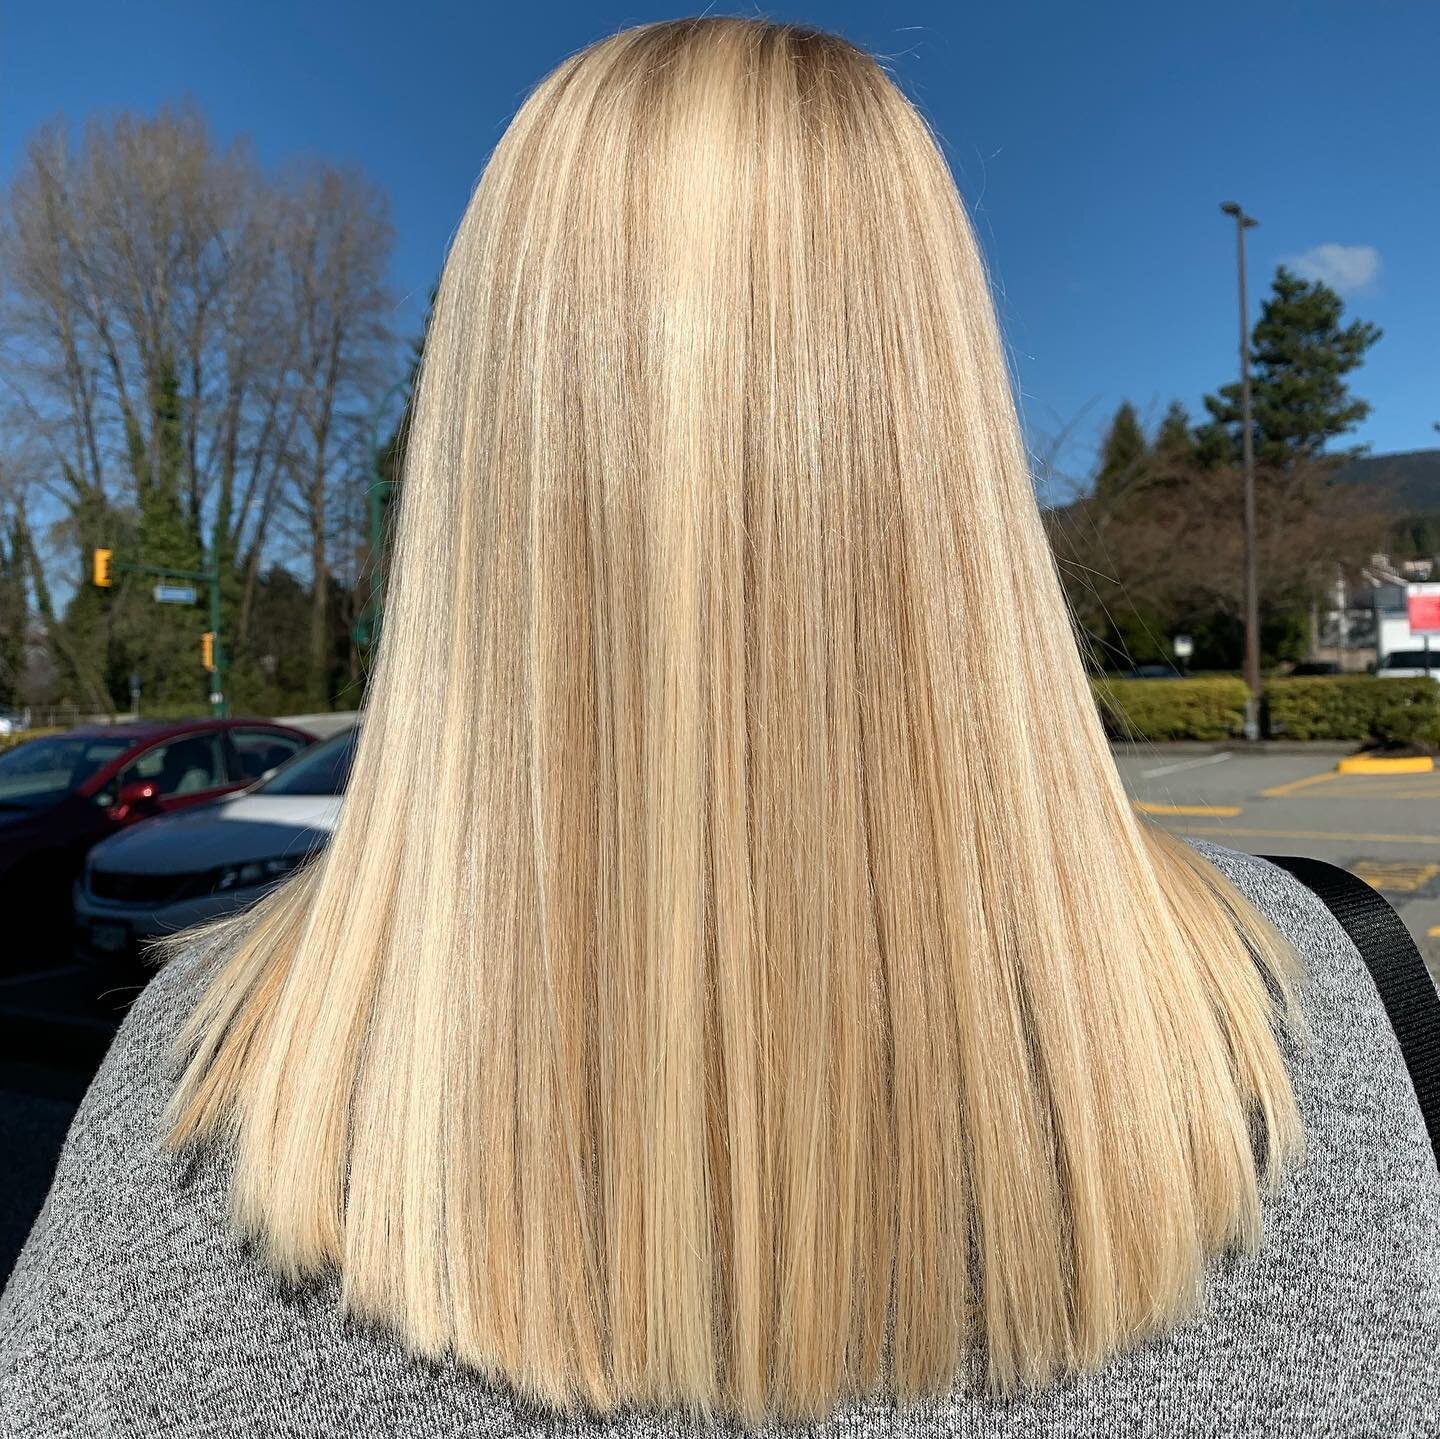 Got this beautiful shine using our Labiosthetique&rsquo;s protective glossing essence! Our shiny in-salon treatment lasts for 6 shampoos and is available as an at home treatment as well! Perfect timing for the sunny weather. Work by Vickie🤍

-
#salo